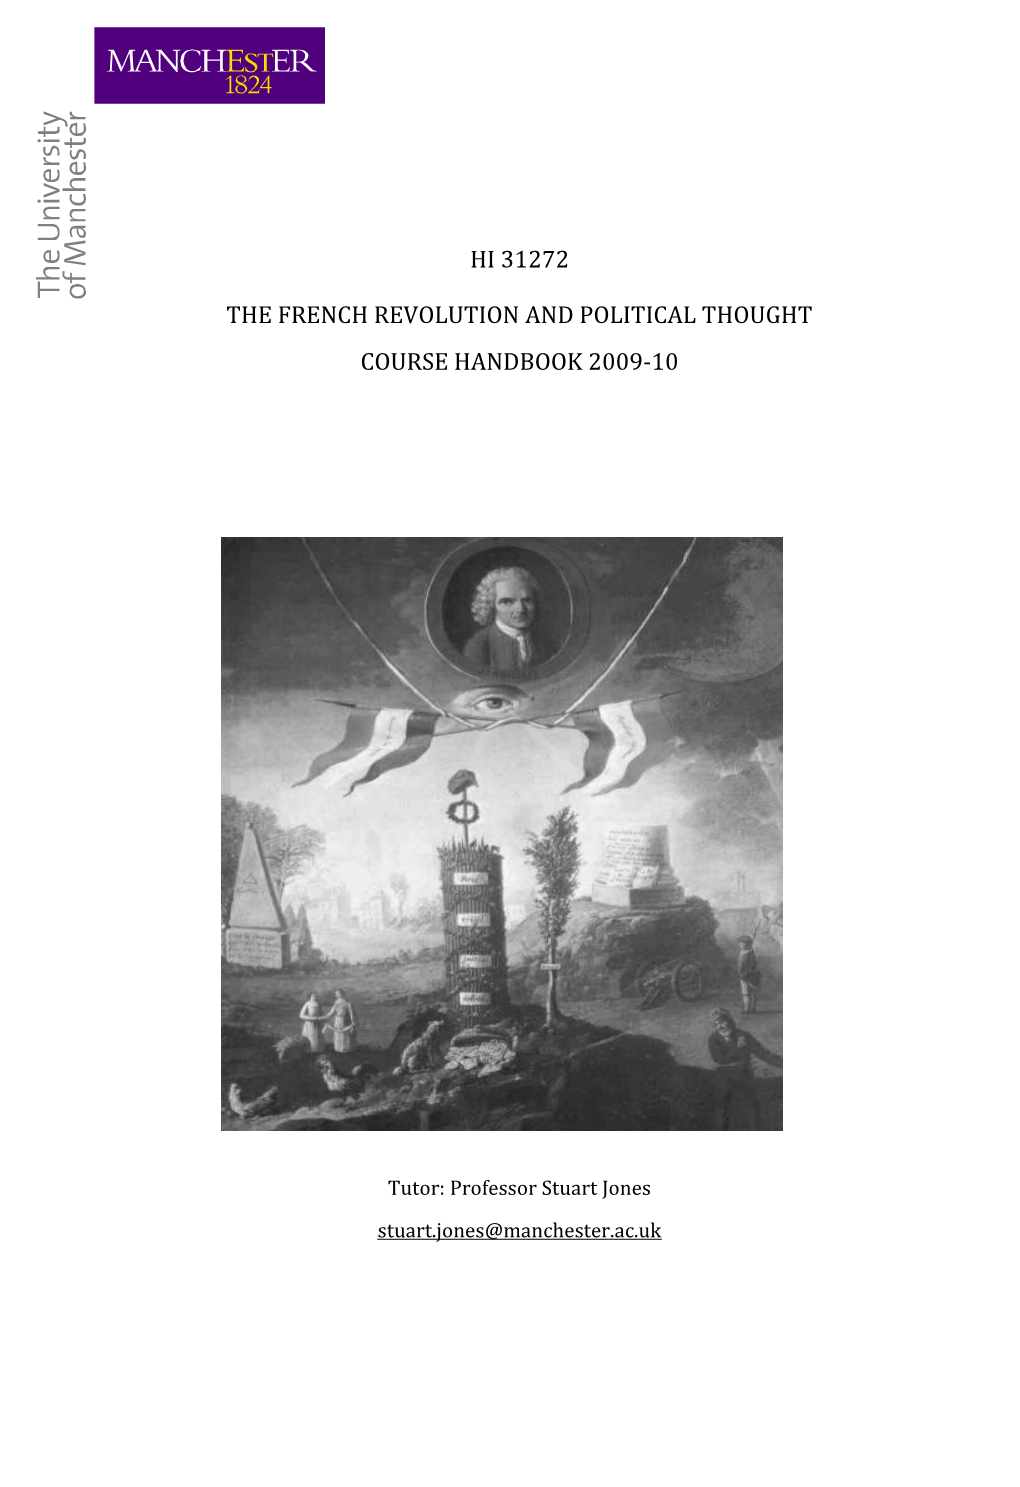 HI 3840 French Revolution and Political Thought 1789-1848